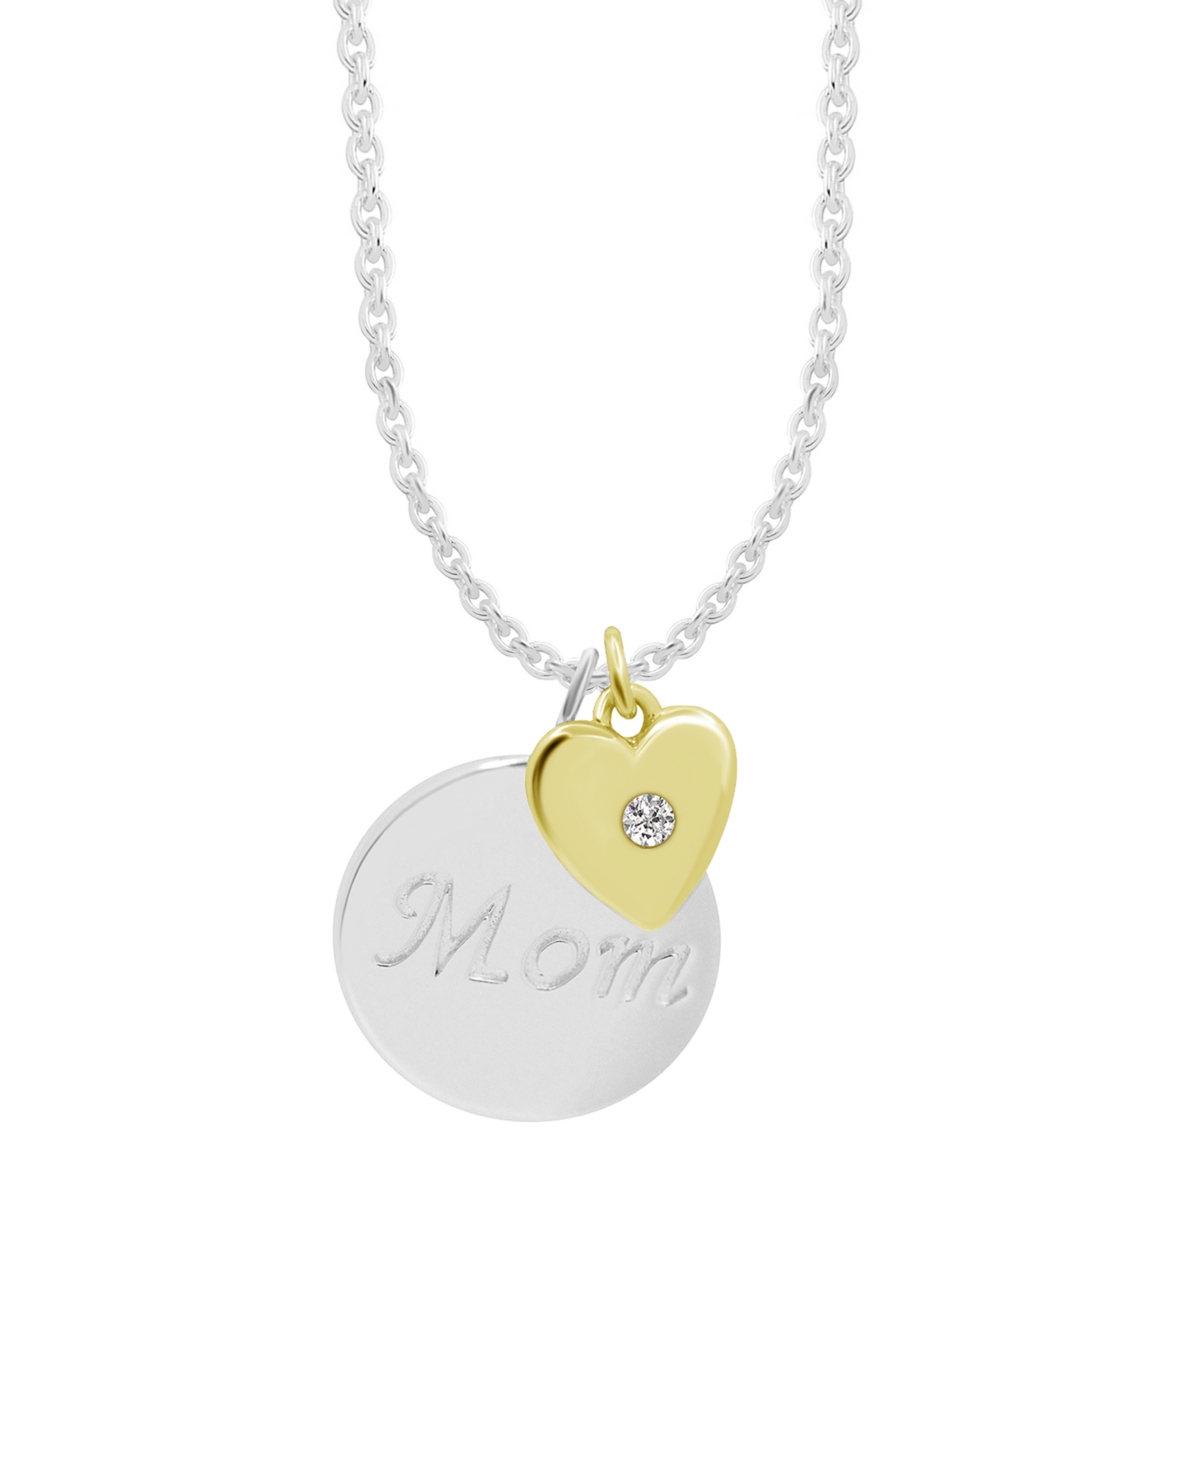 Silver Plated Two-Tone Layered Mom Necklace in Gift Card Box - Two Tone